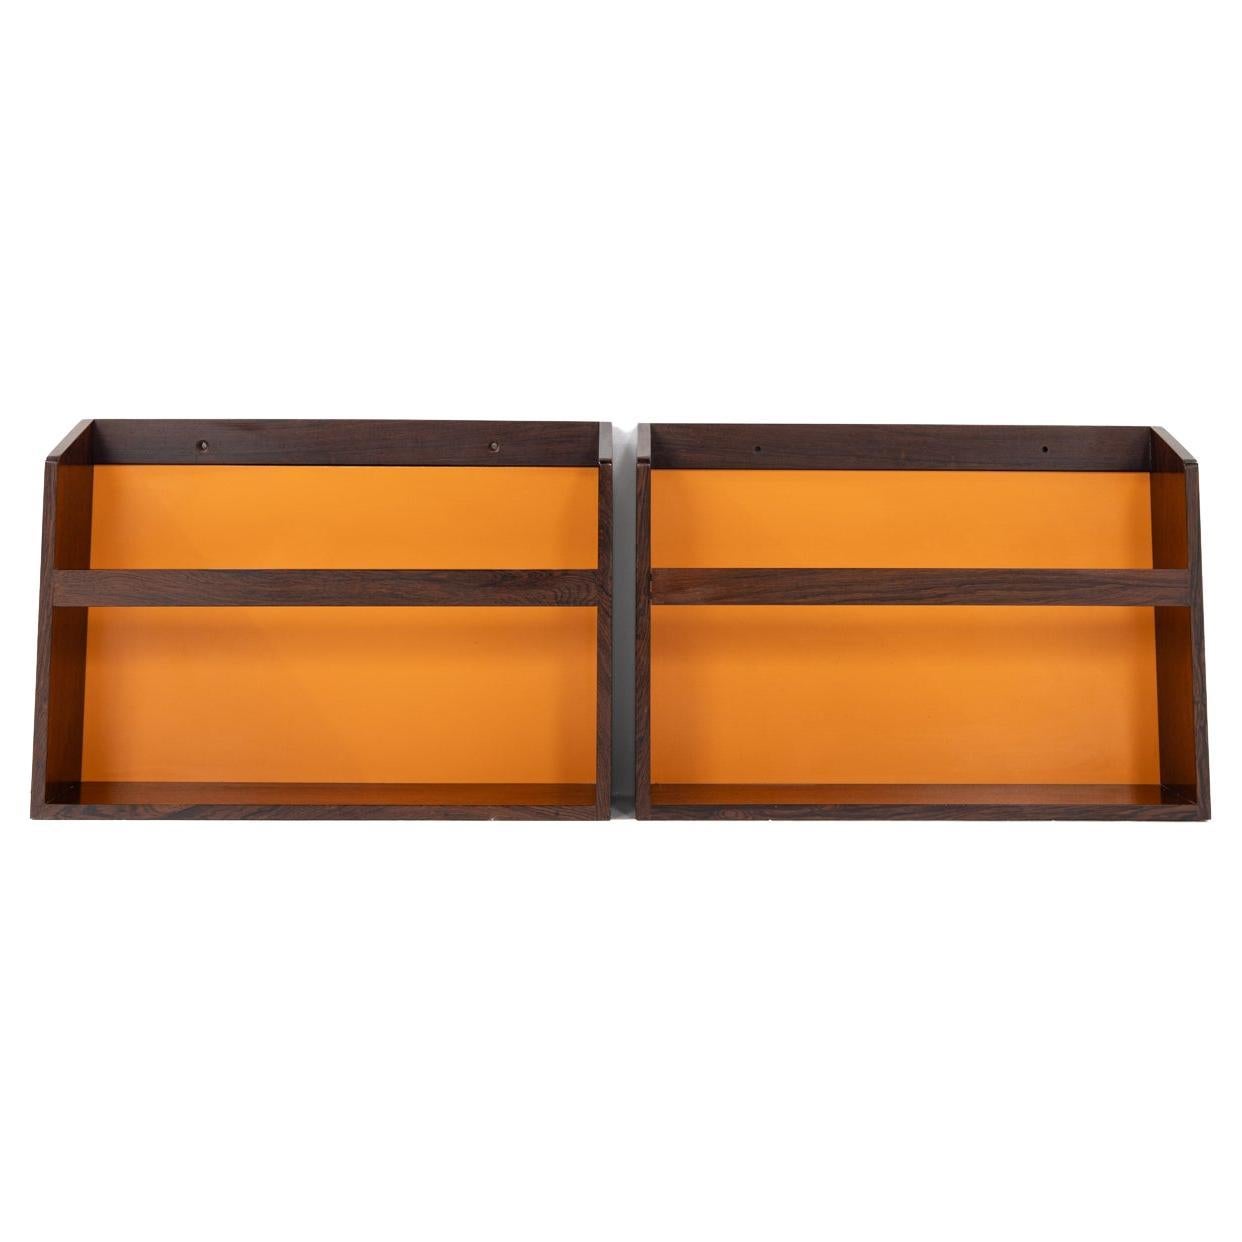 Pair of wall mounted magazinracks  attributed to Steffen Syrach Larsen